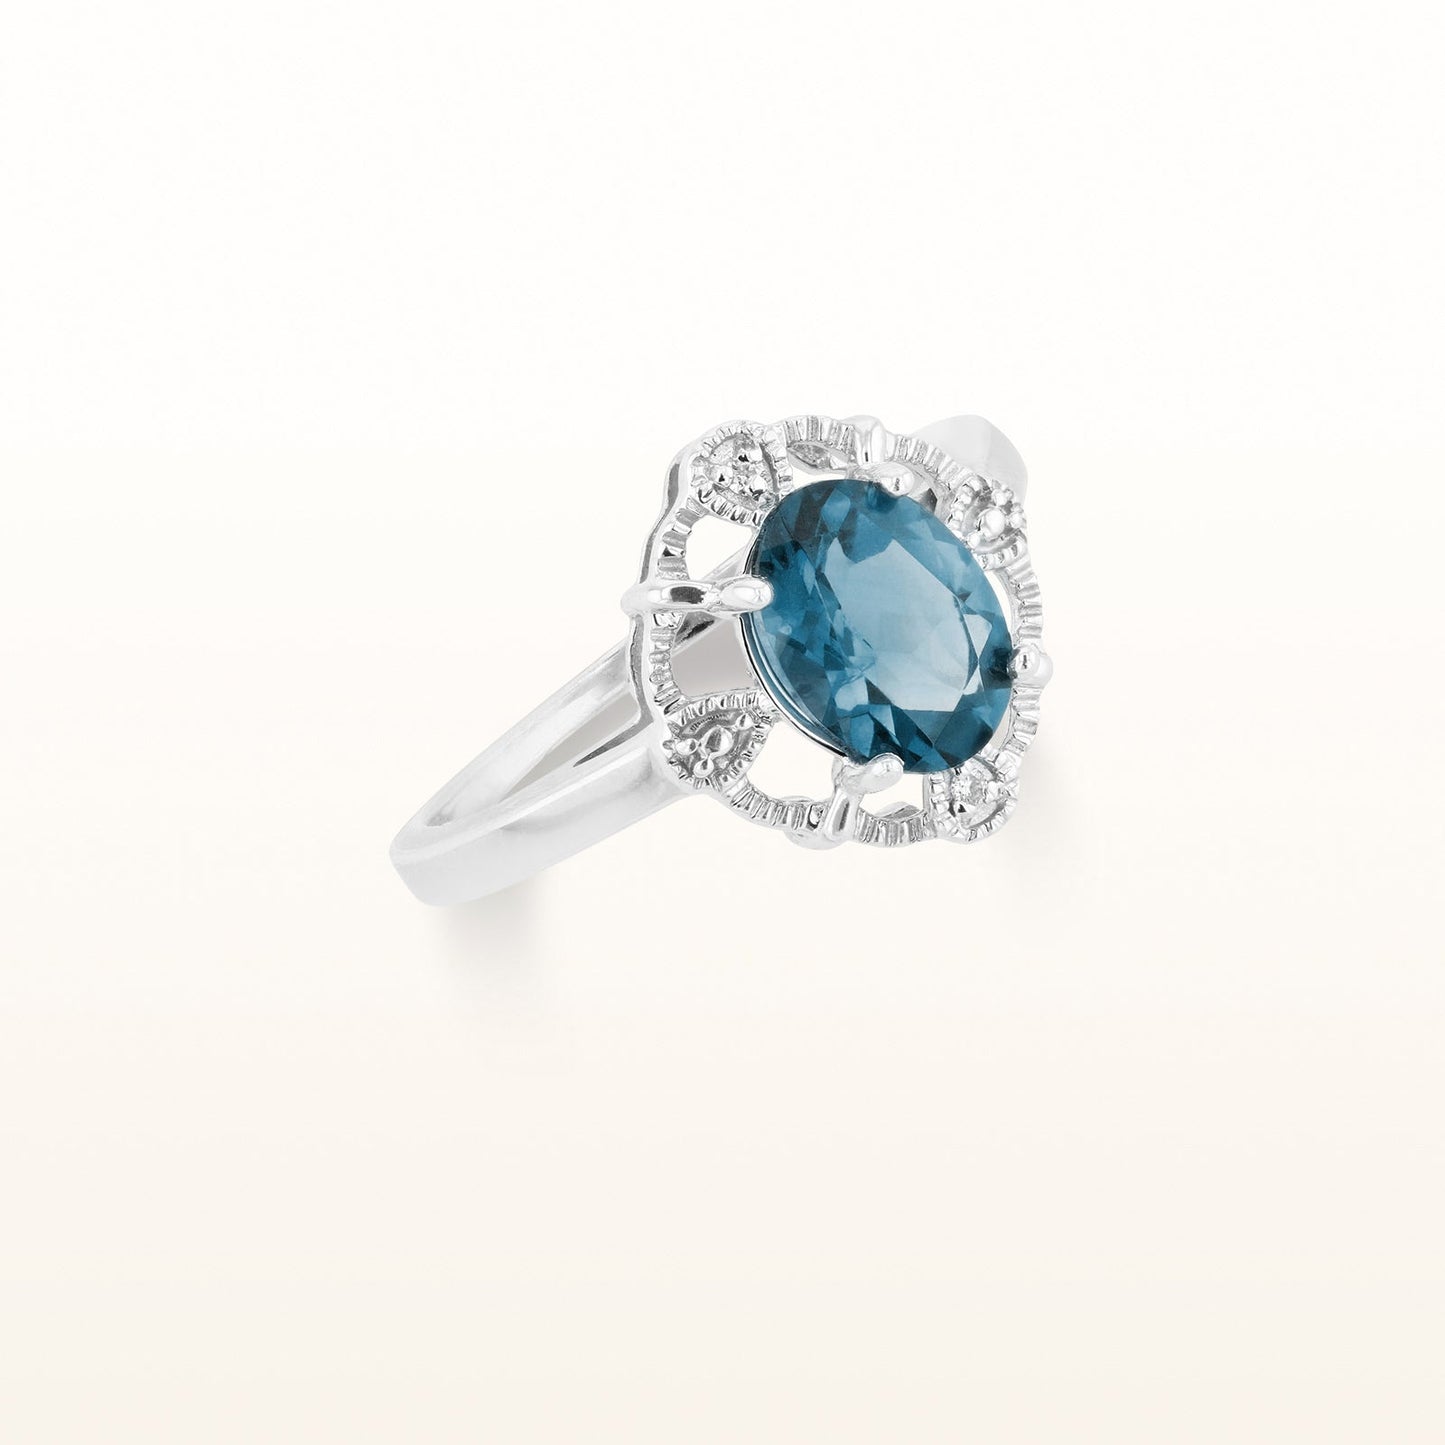 Oval Gemstone & Diamond Lace Halo Ring in Sterling Silver